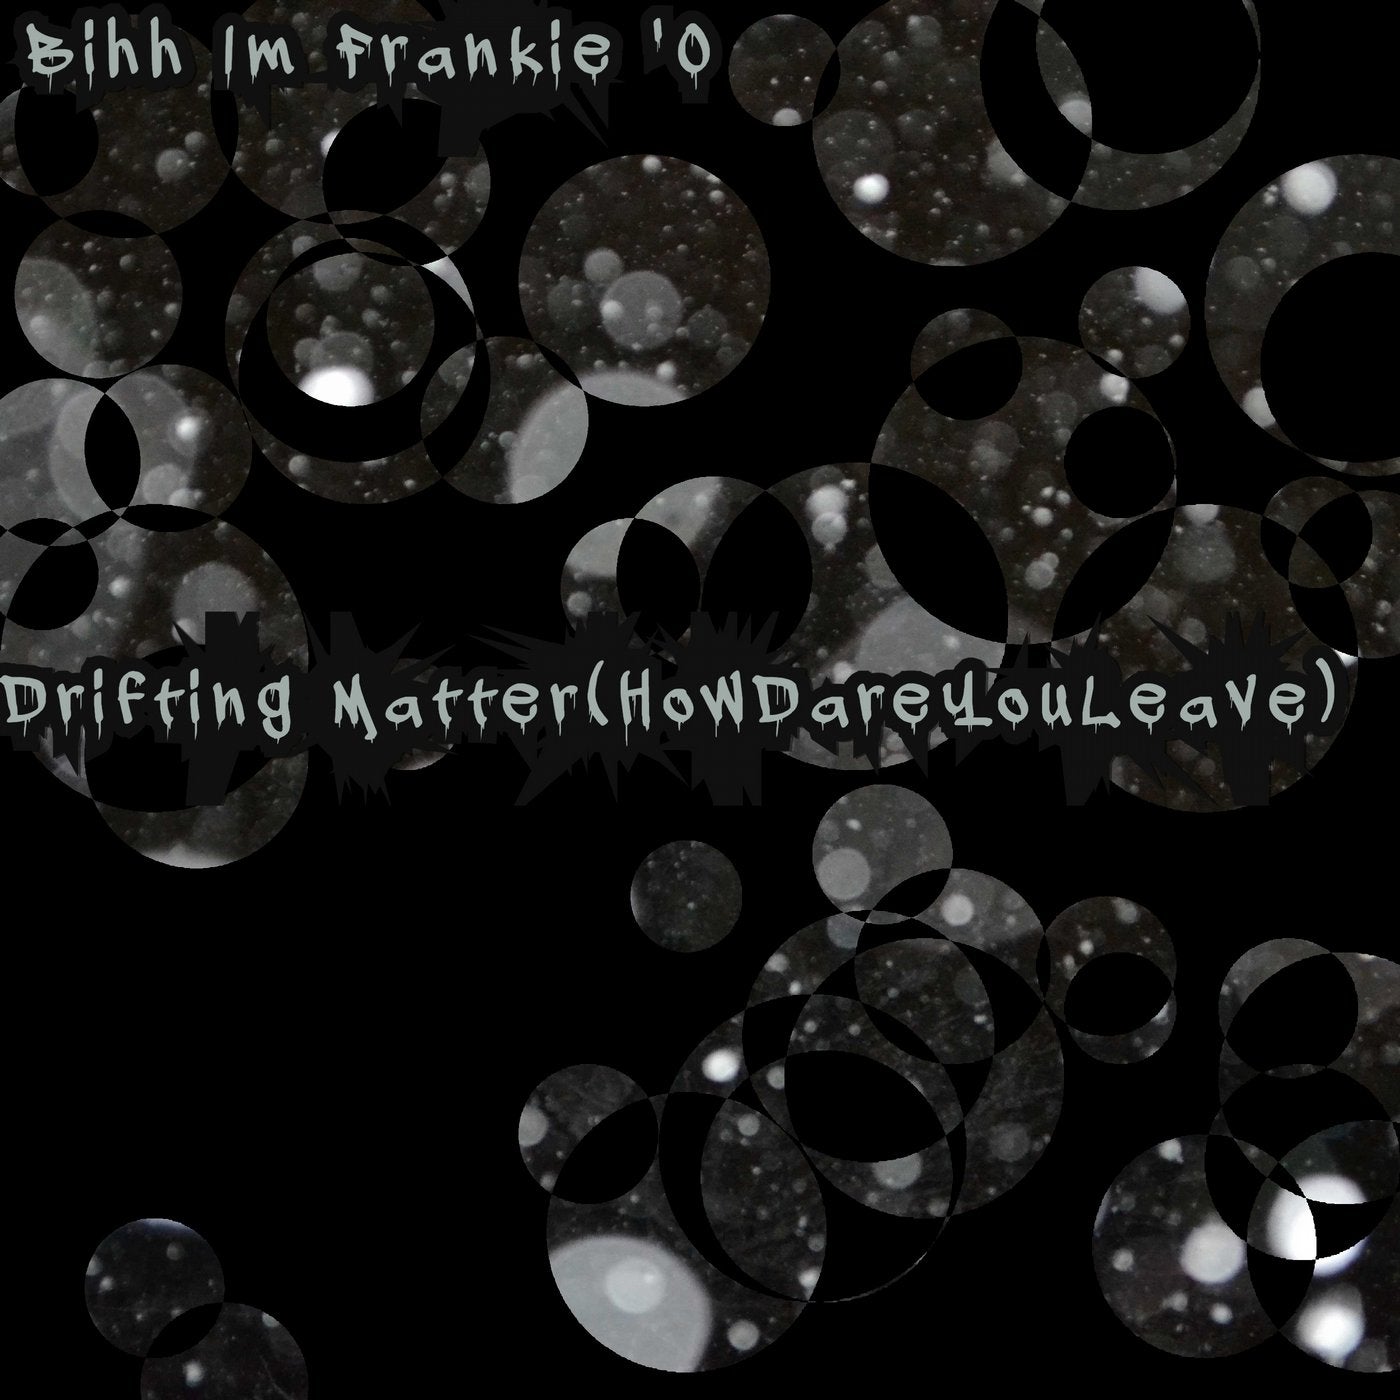 Drifting Matter (How Dare You Leave)